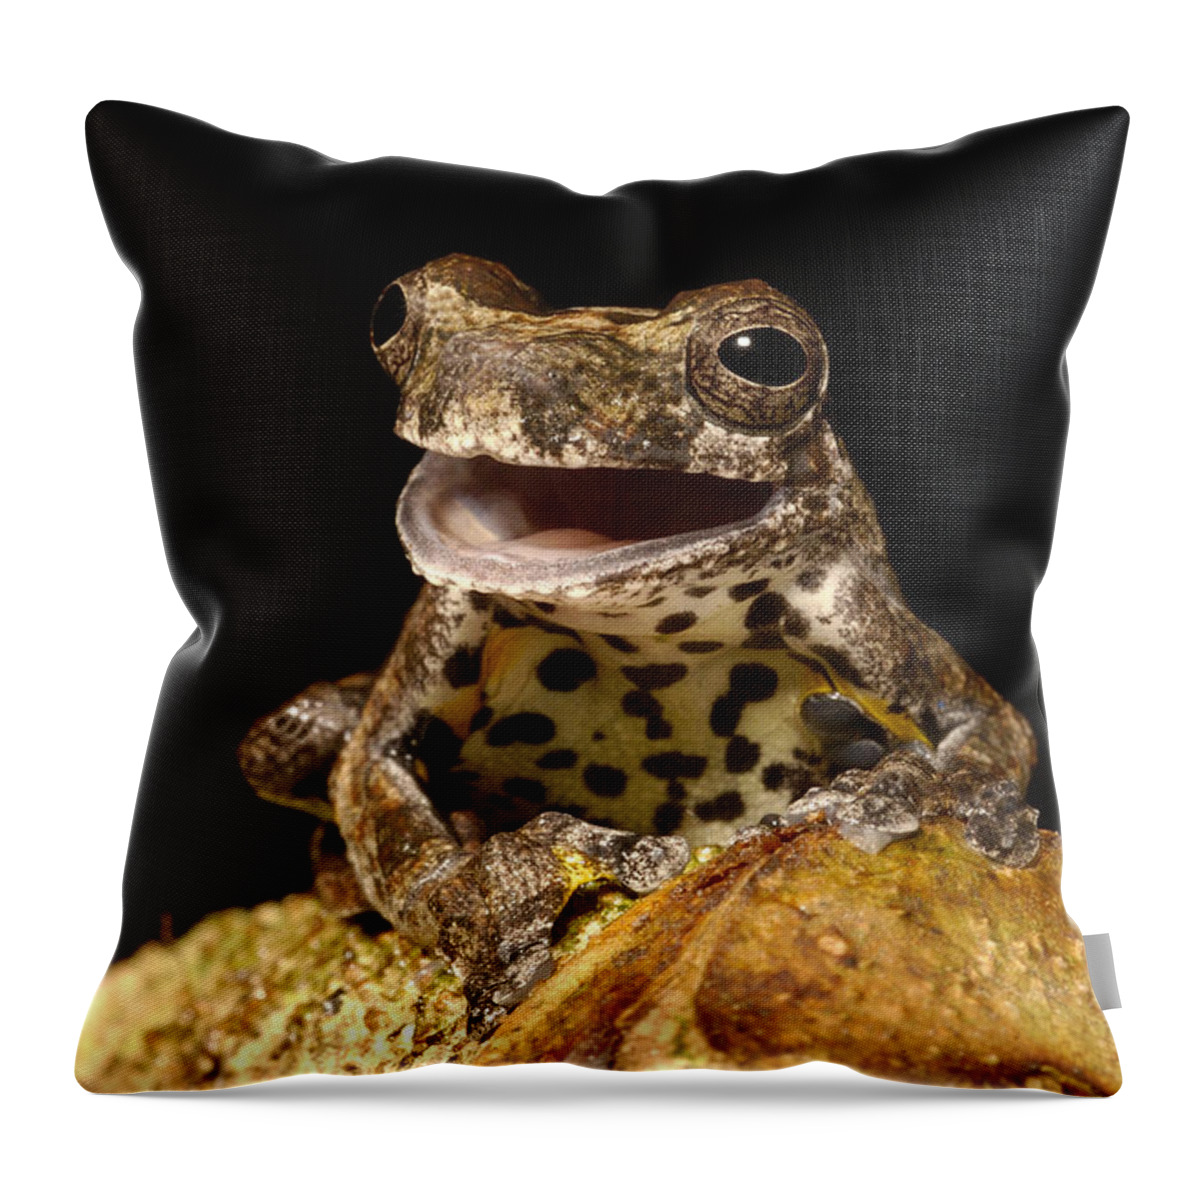 Feb0514 Throw Pillow featuring the photograph Marbled Tree Frog Amazonia Ecuador by Pete Oxford